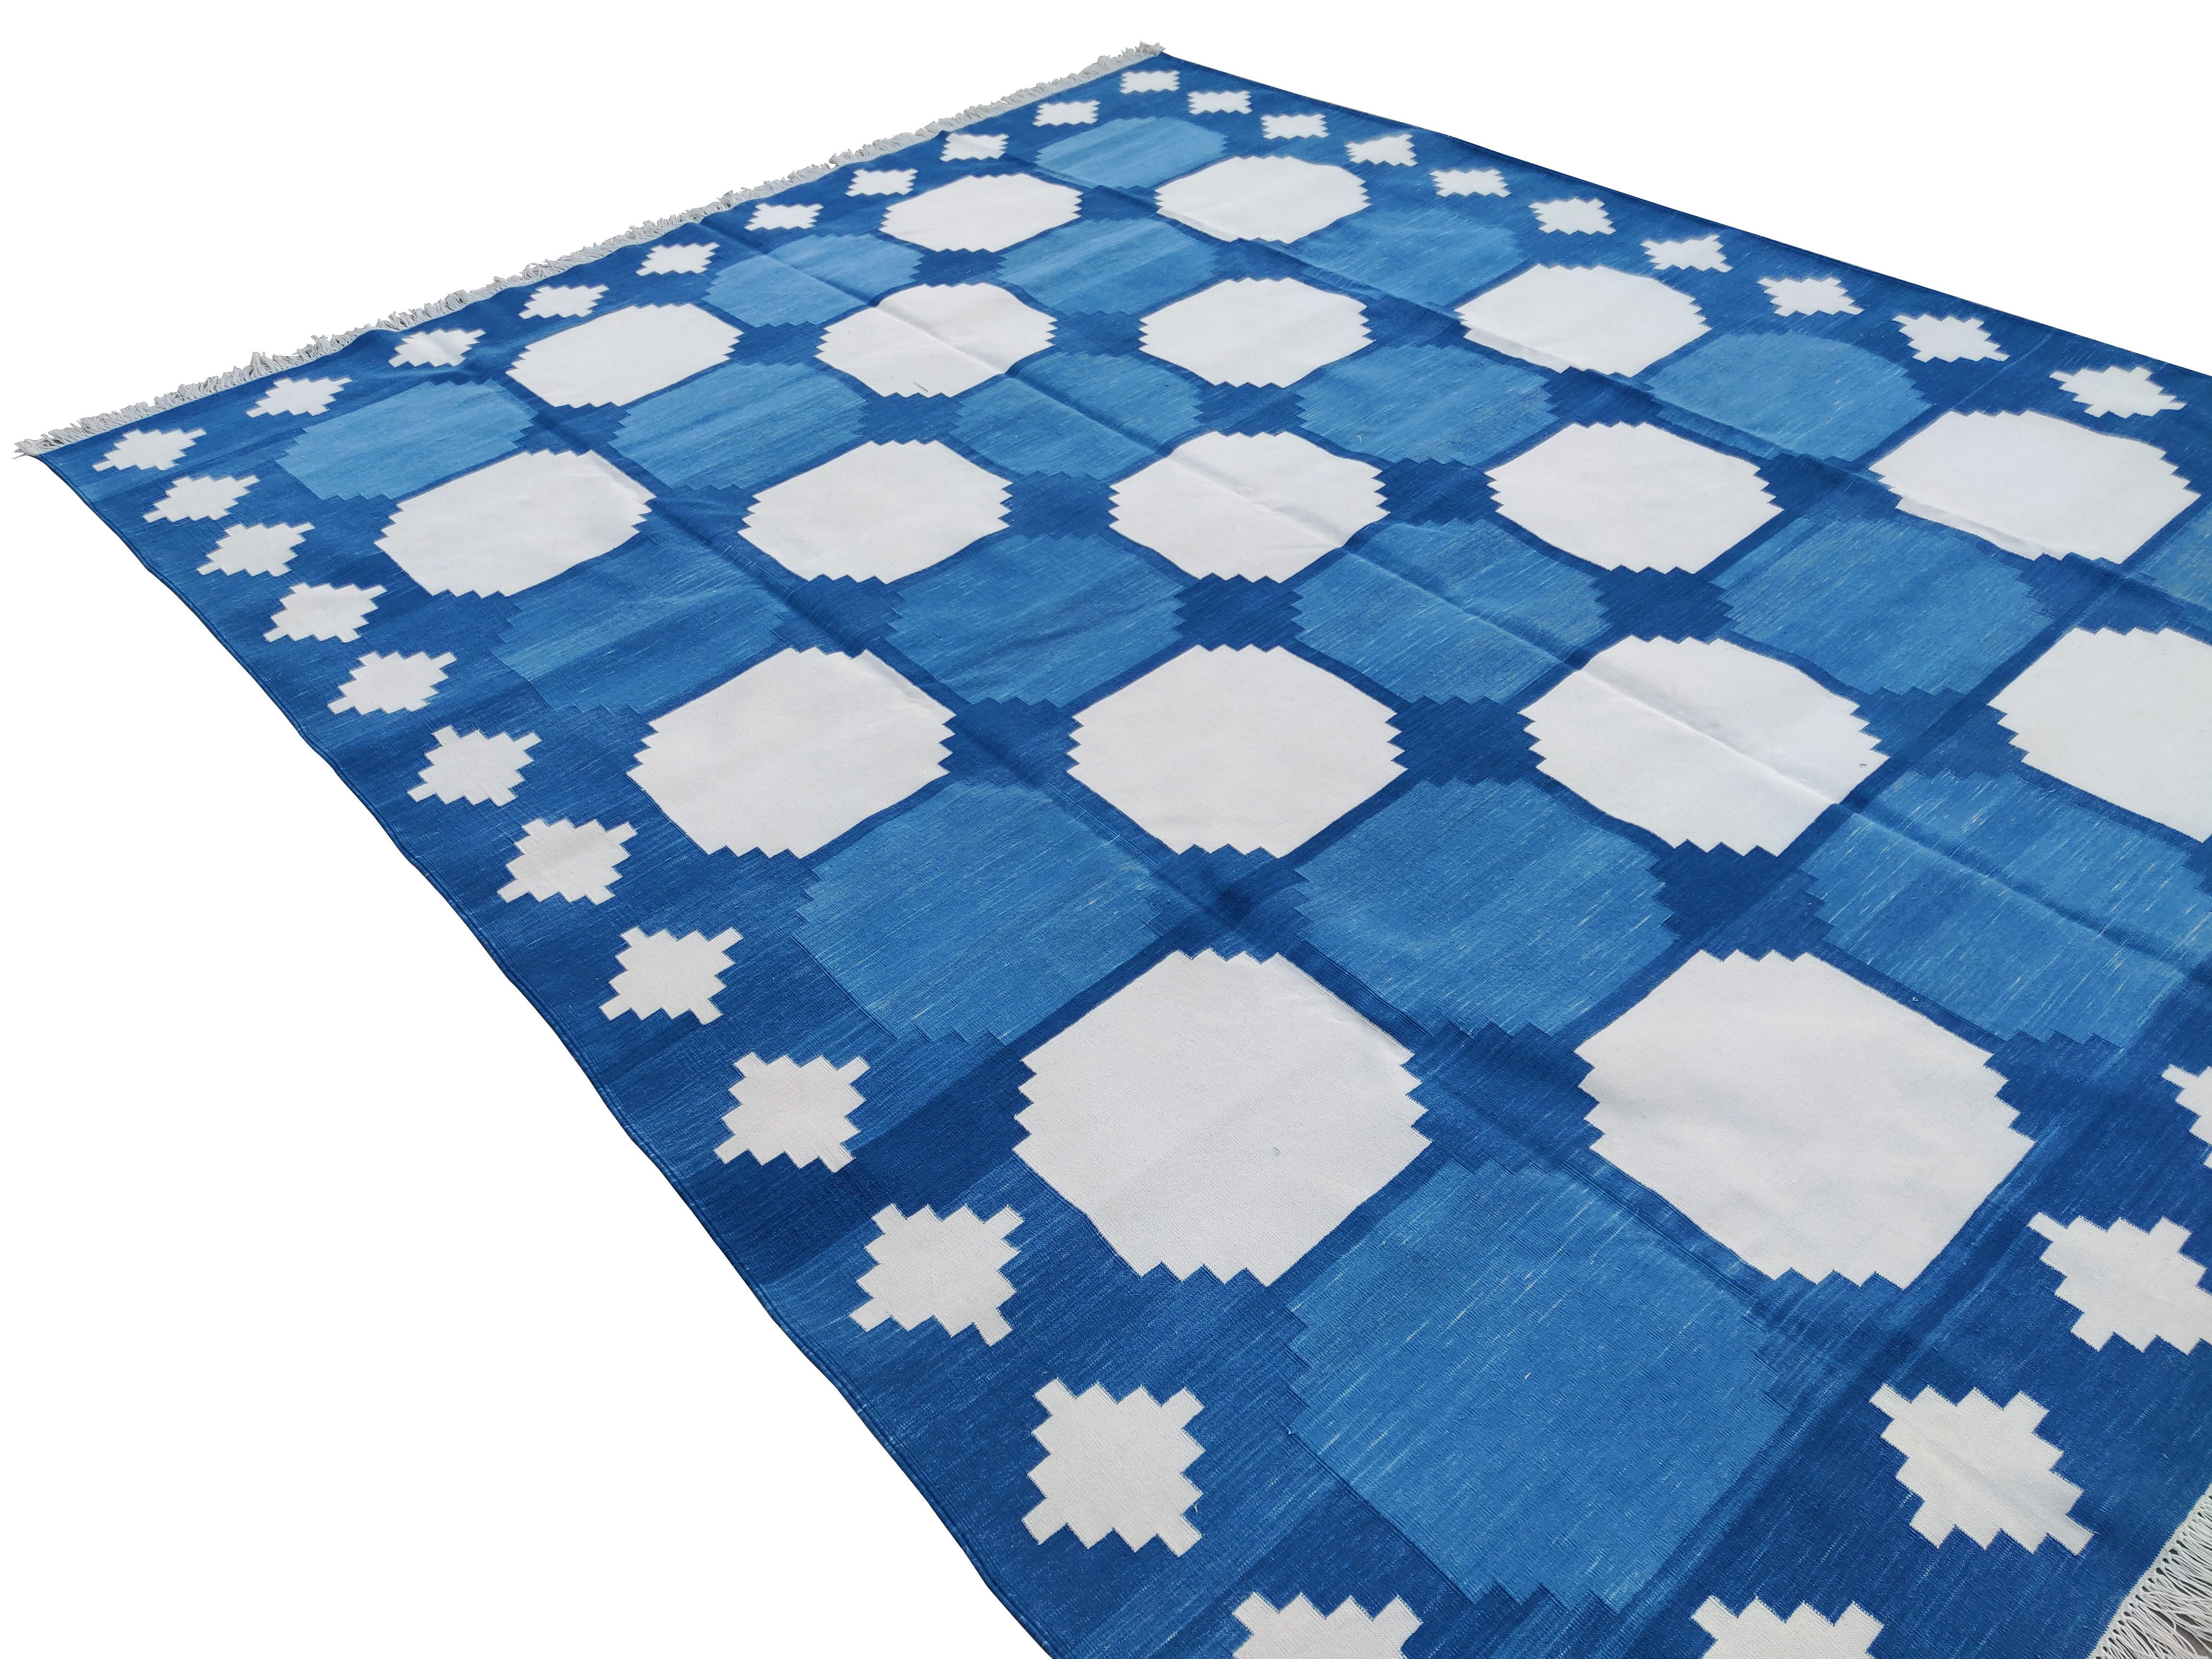 Contemporary Handmade Cotton Area Flat Weave Rug, Blue, White Geometric Indian Dhurrie-8x10 For Sale